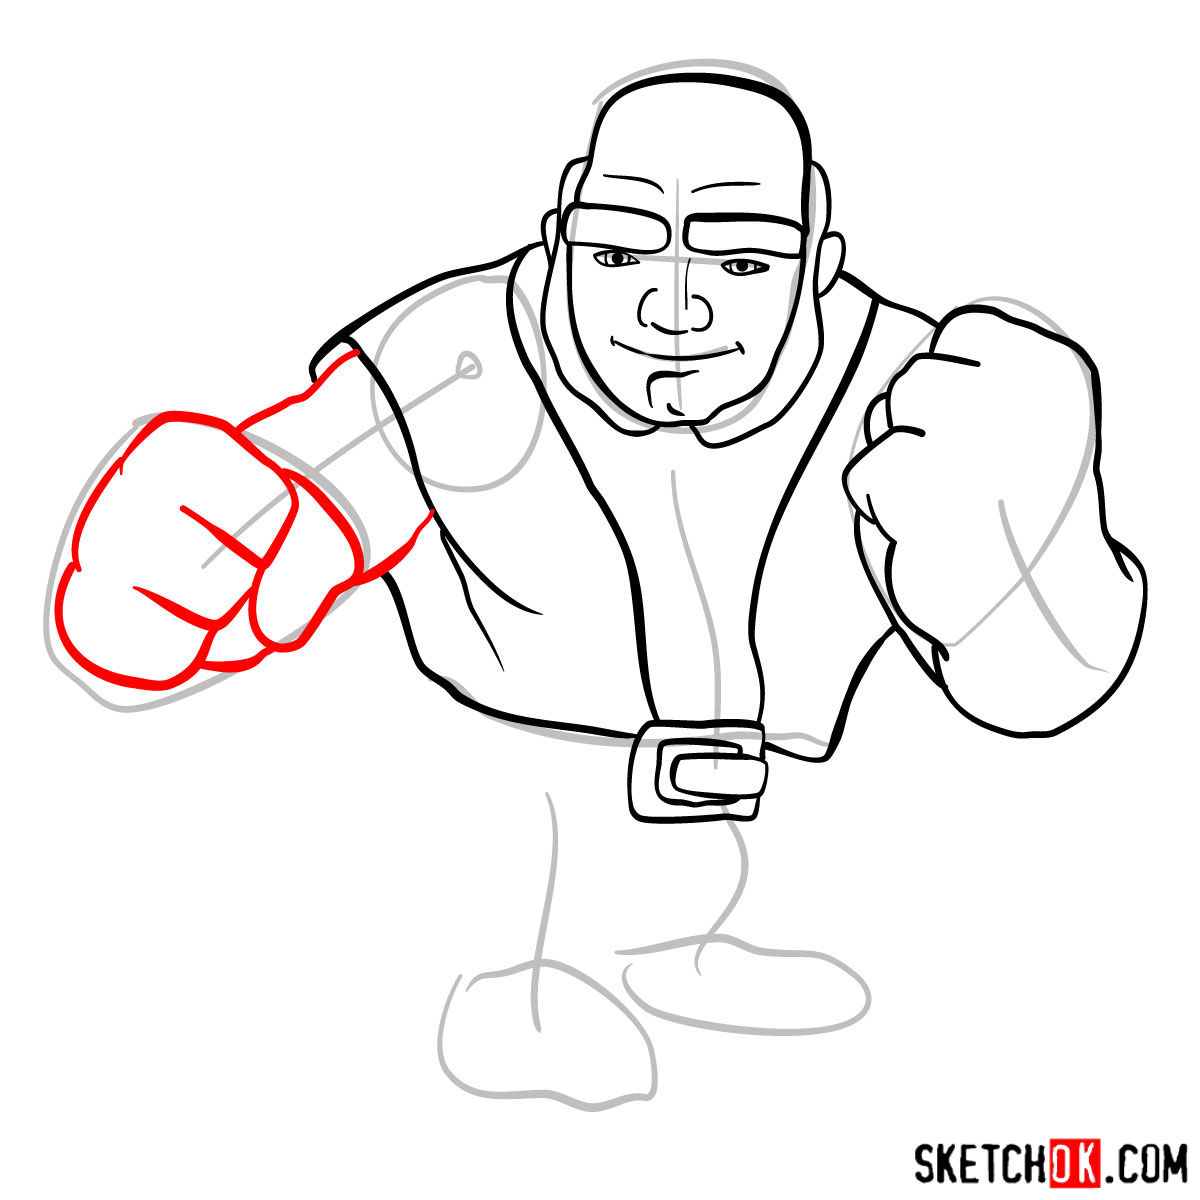 How to draw Giant from Clash of Clans - step 07